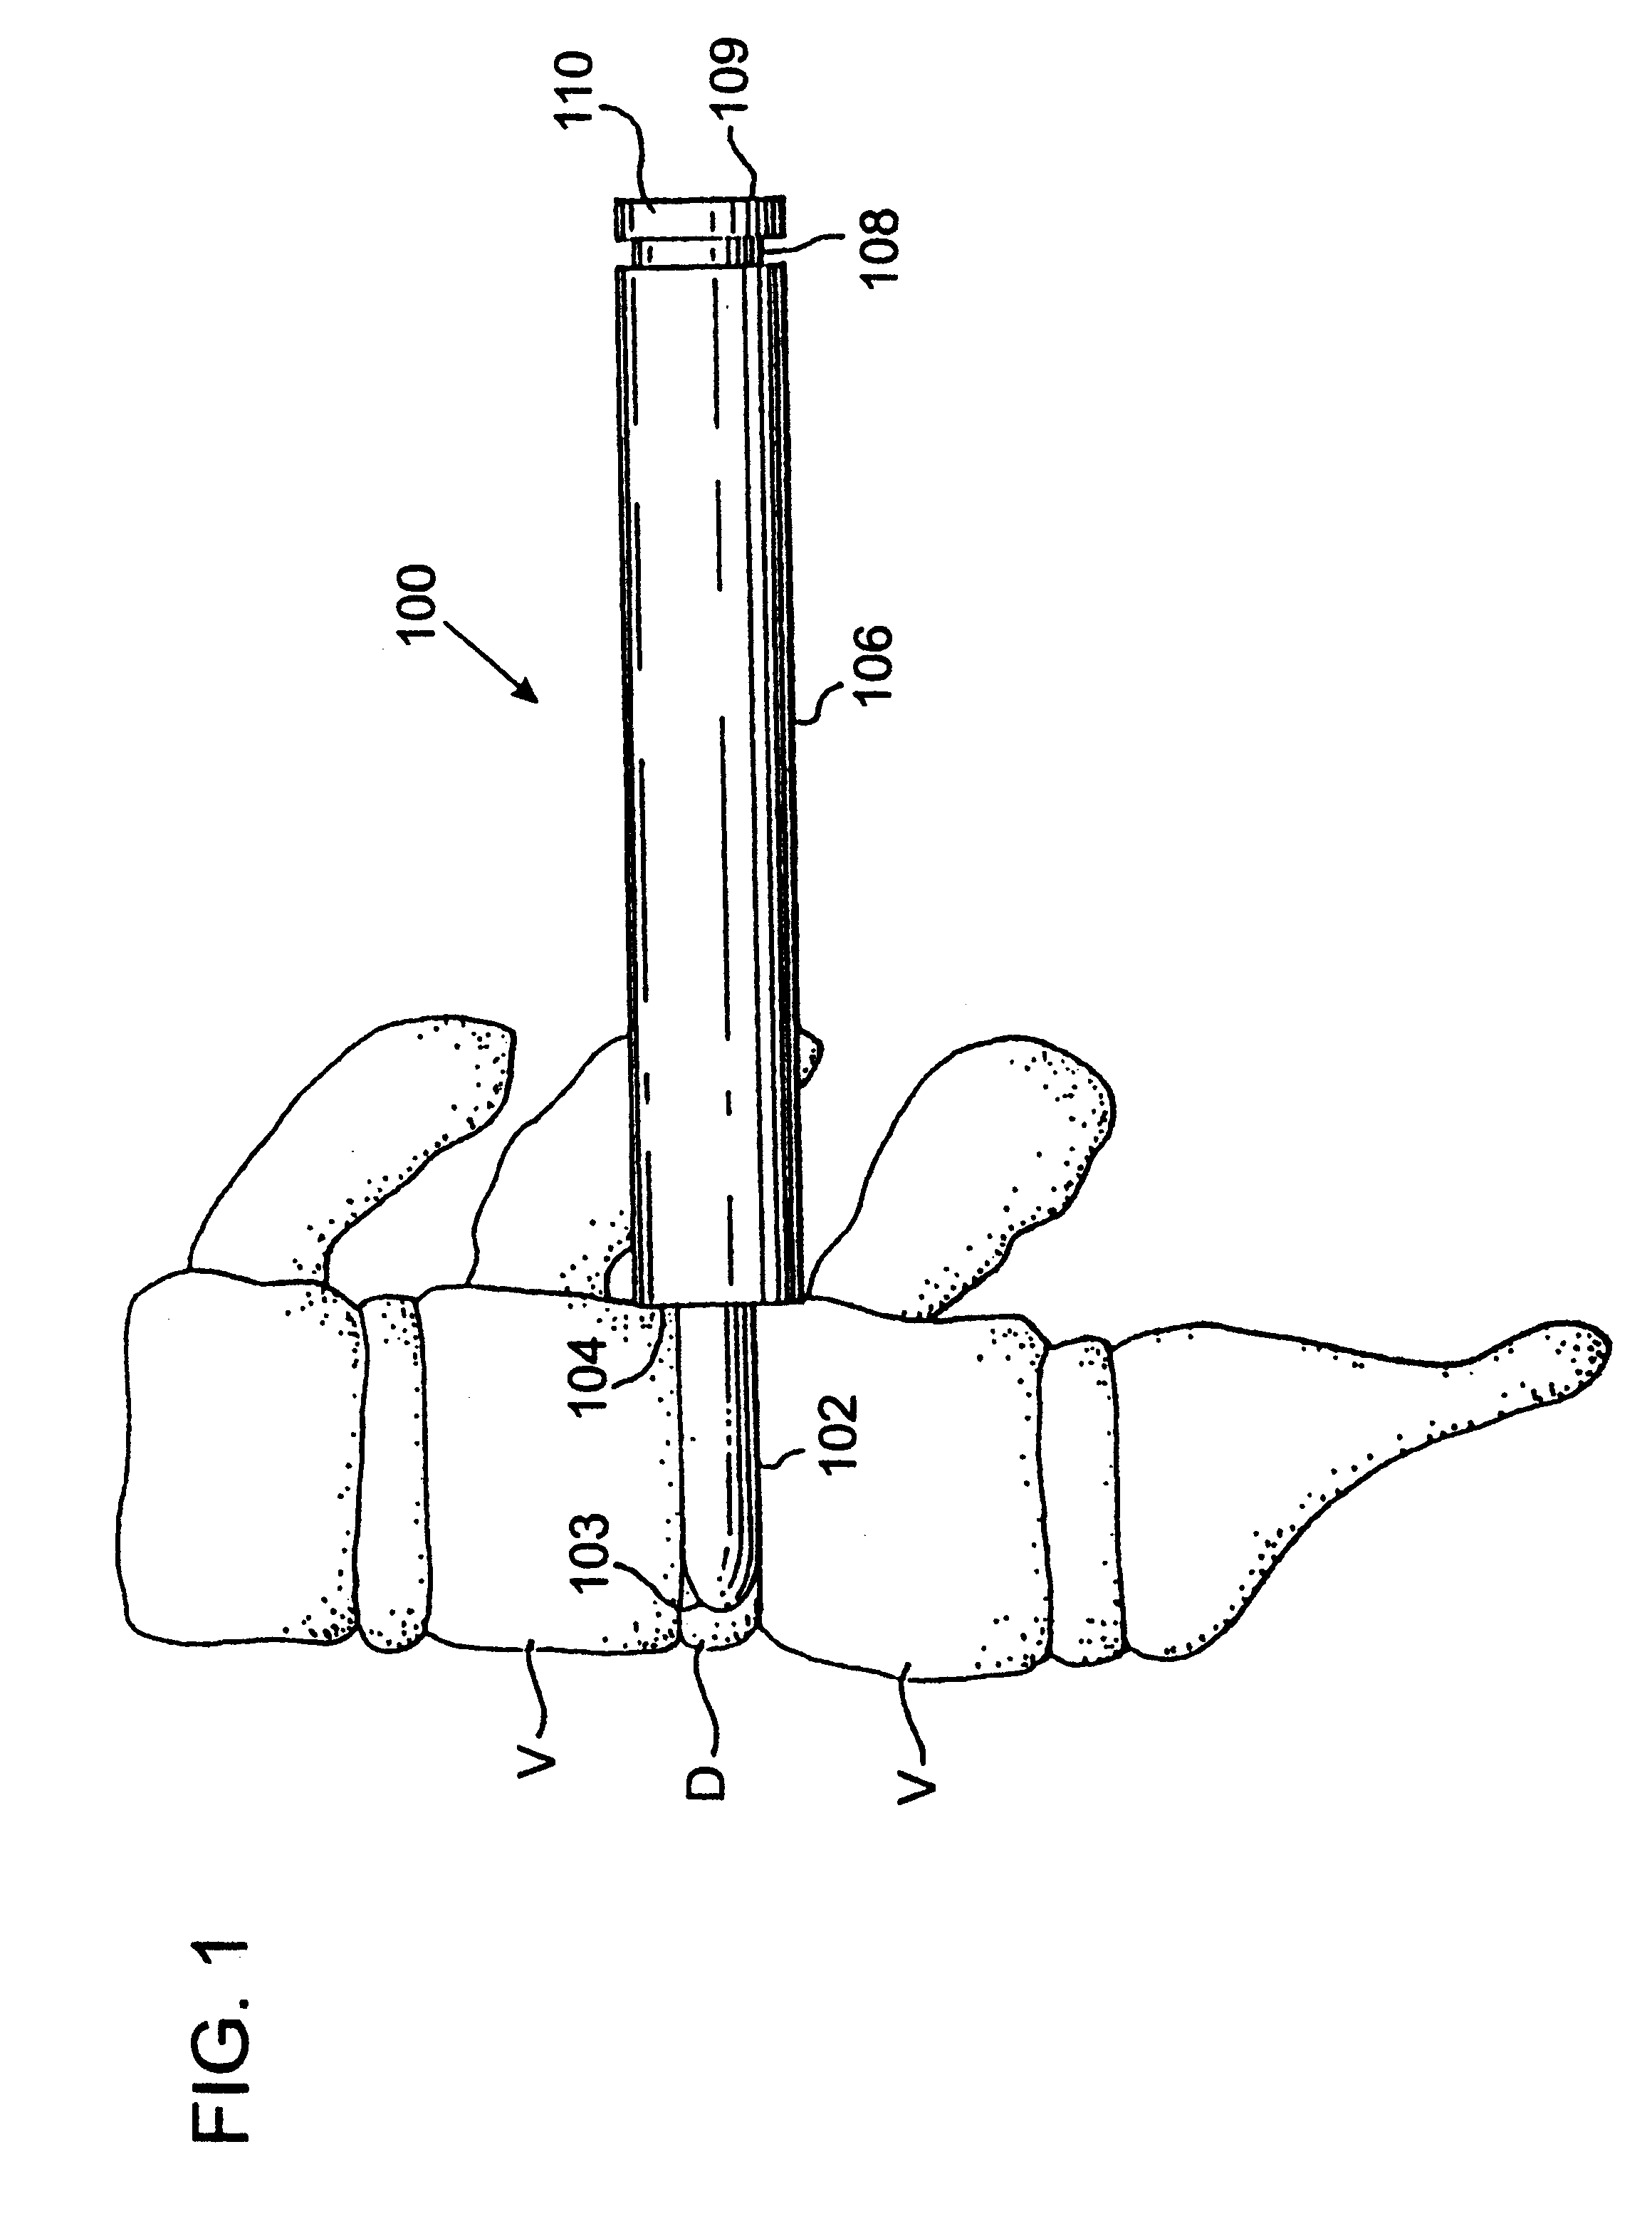 Apparatus for use in inserting spinal implants